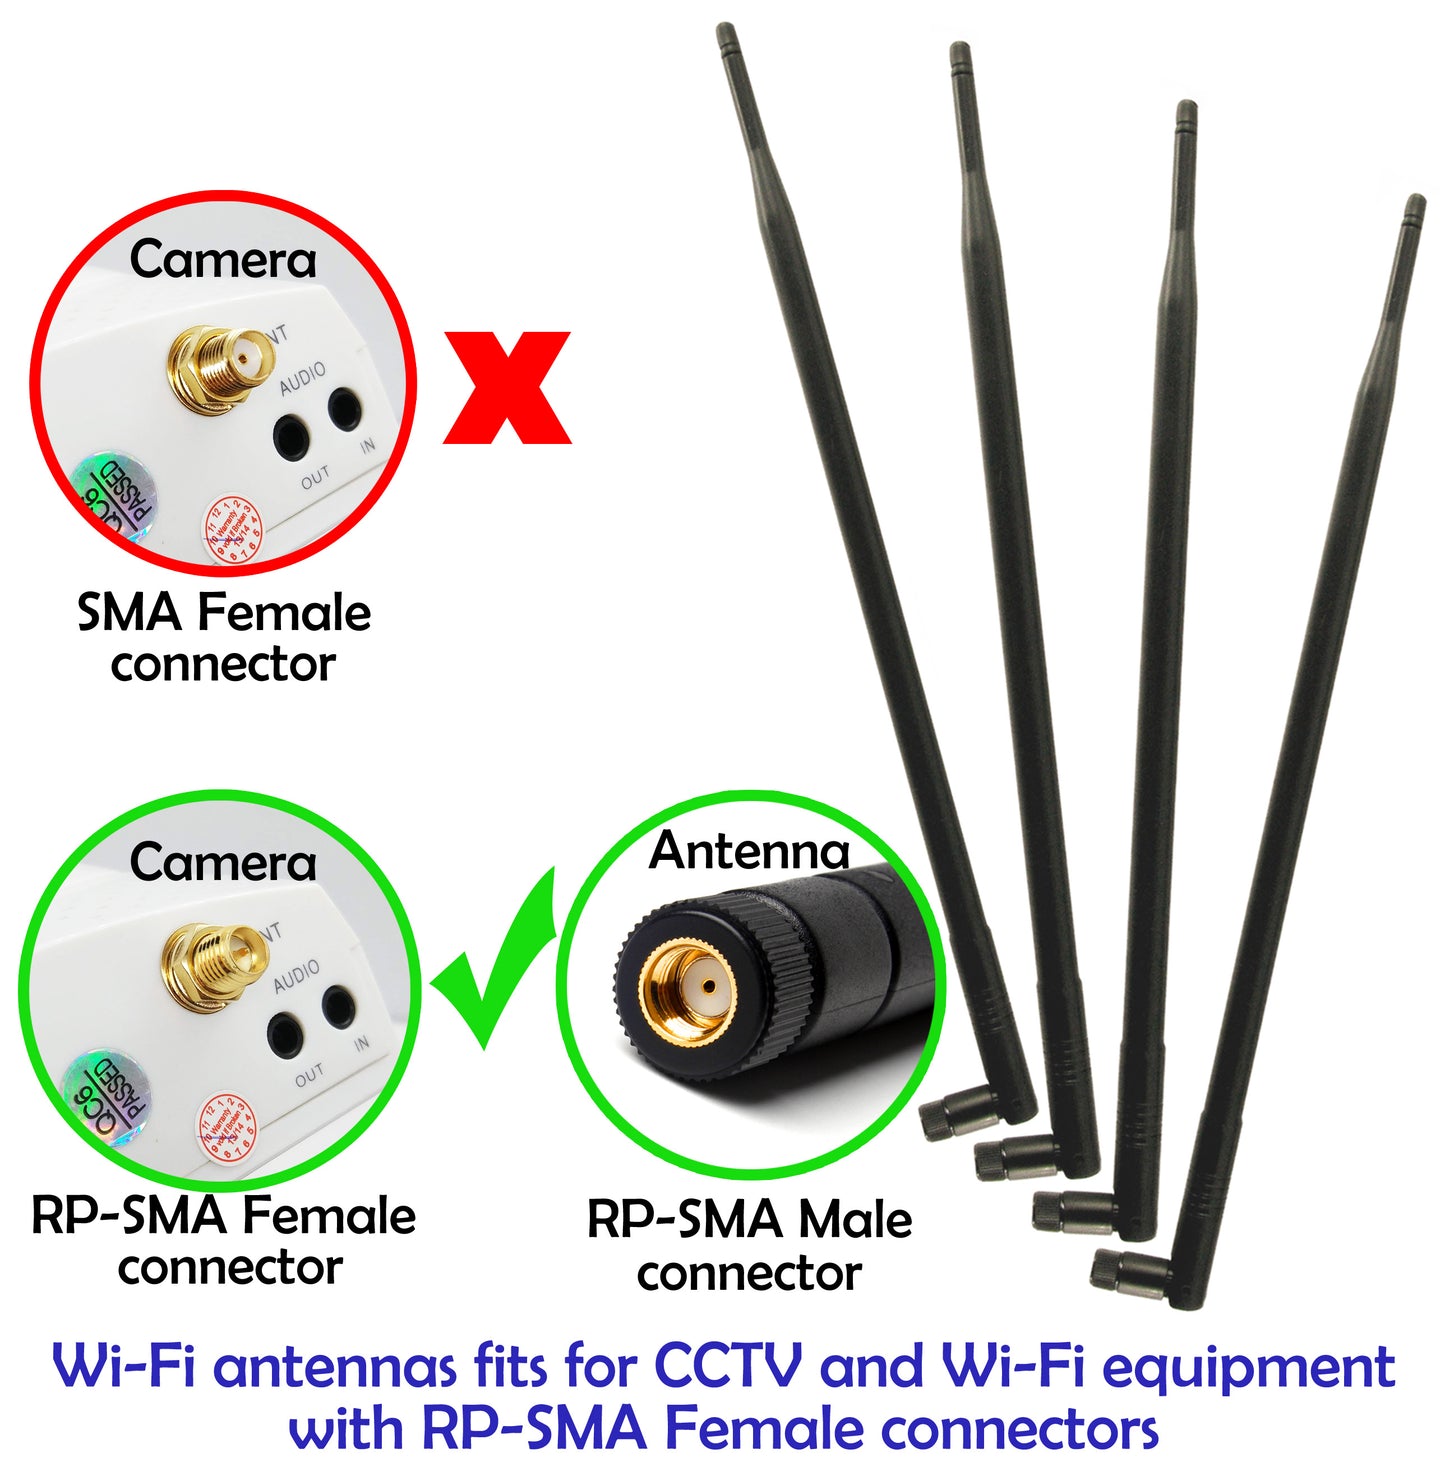 4 pcs of Universal 9dBi Wi-Fi 2.4/5GHz Dual-Band RP-SMA Male Antennas Extension for IP Wireless Security Camera Router and CCTV HD Wireless Camera System Video Antenna for NVR Security IP System